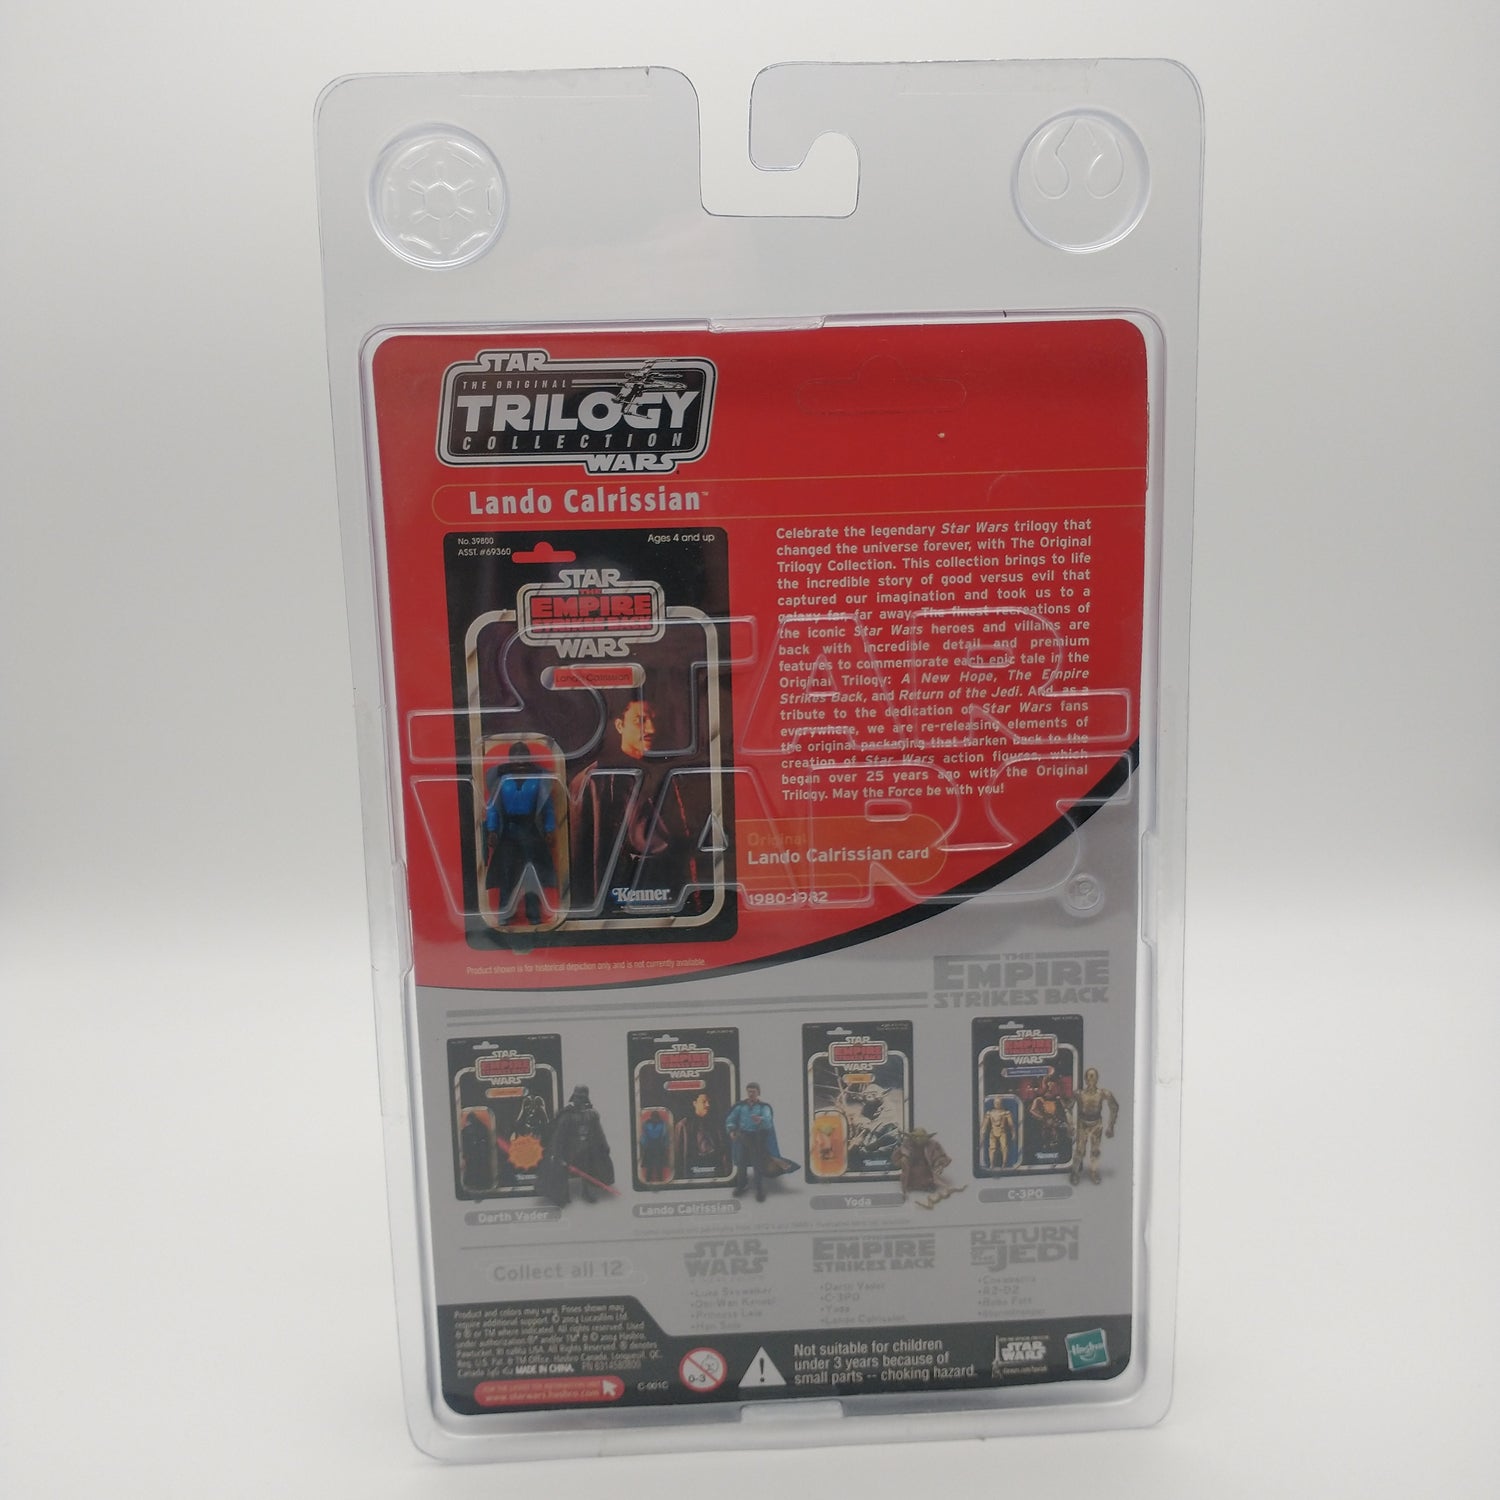  A picture of the back of the cart featuring pictures of other action figures available along with various playsets available for purchase. 